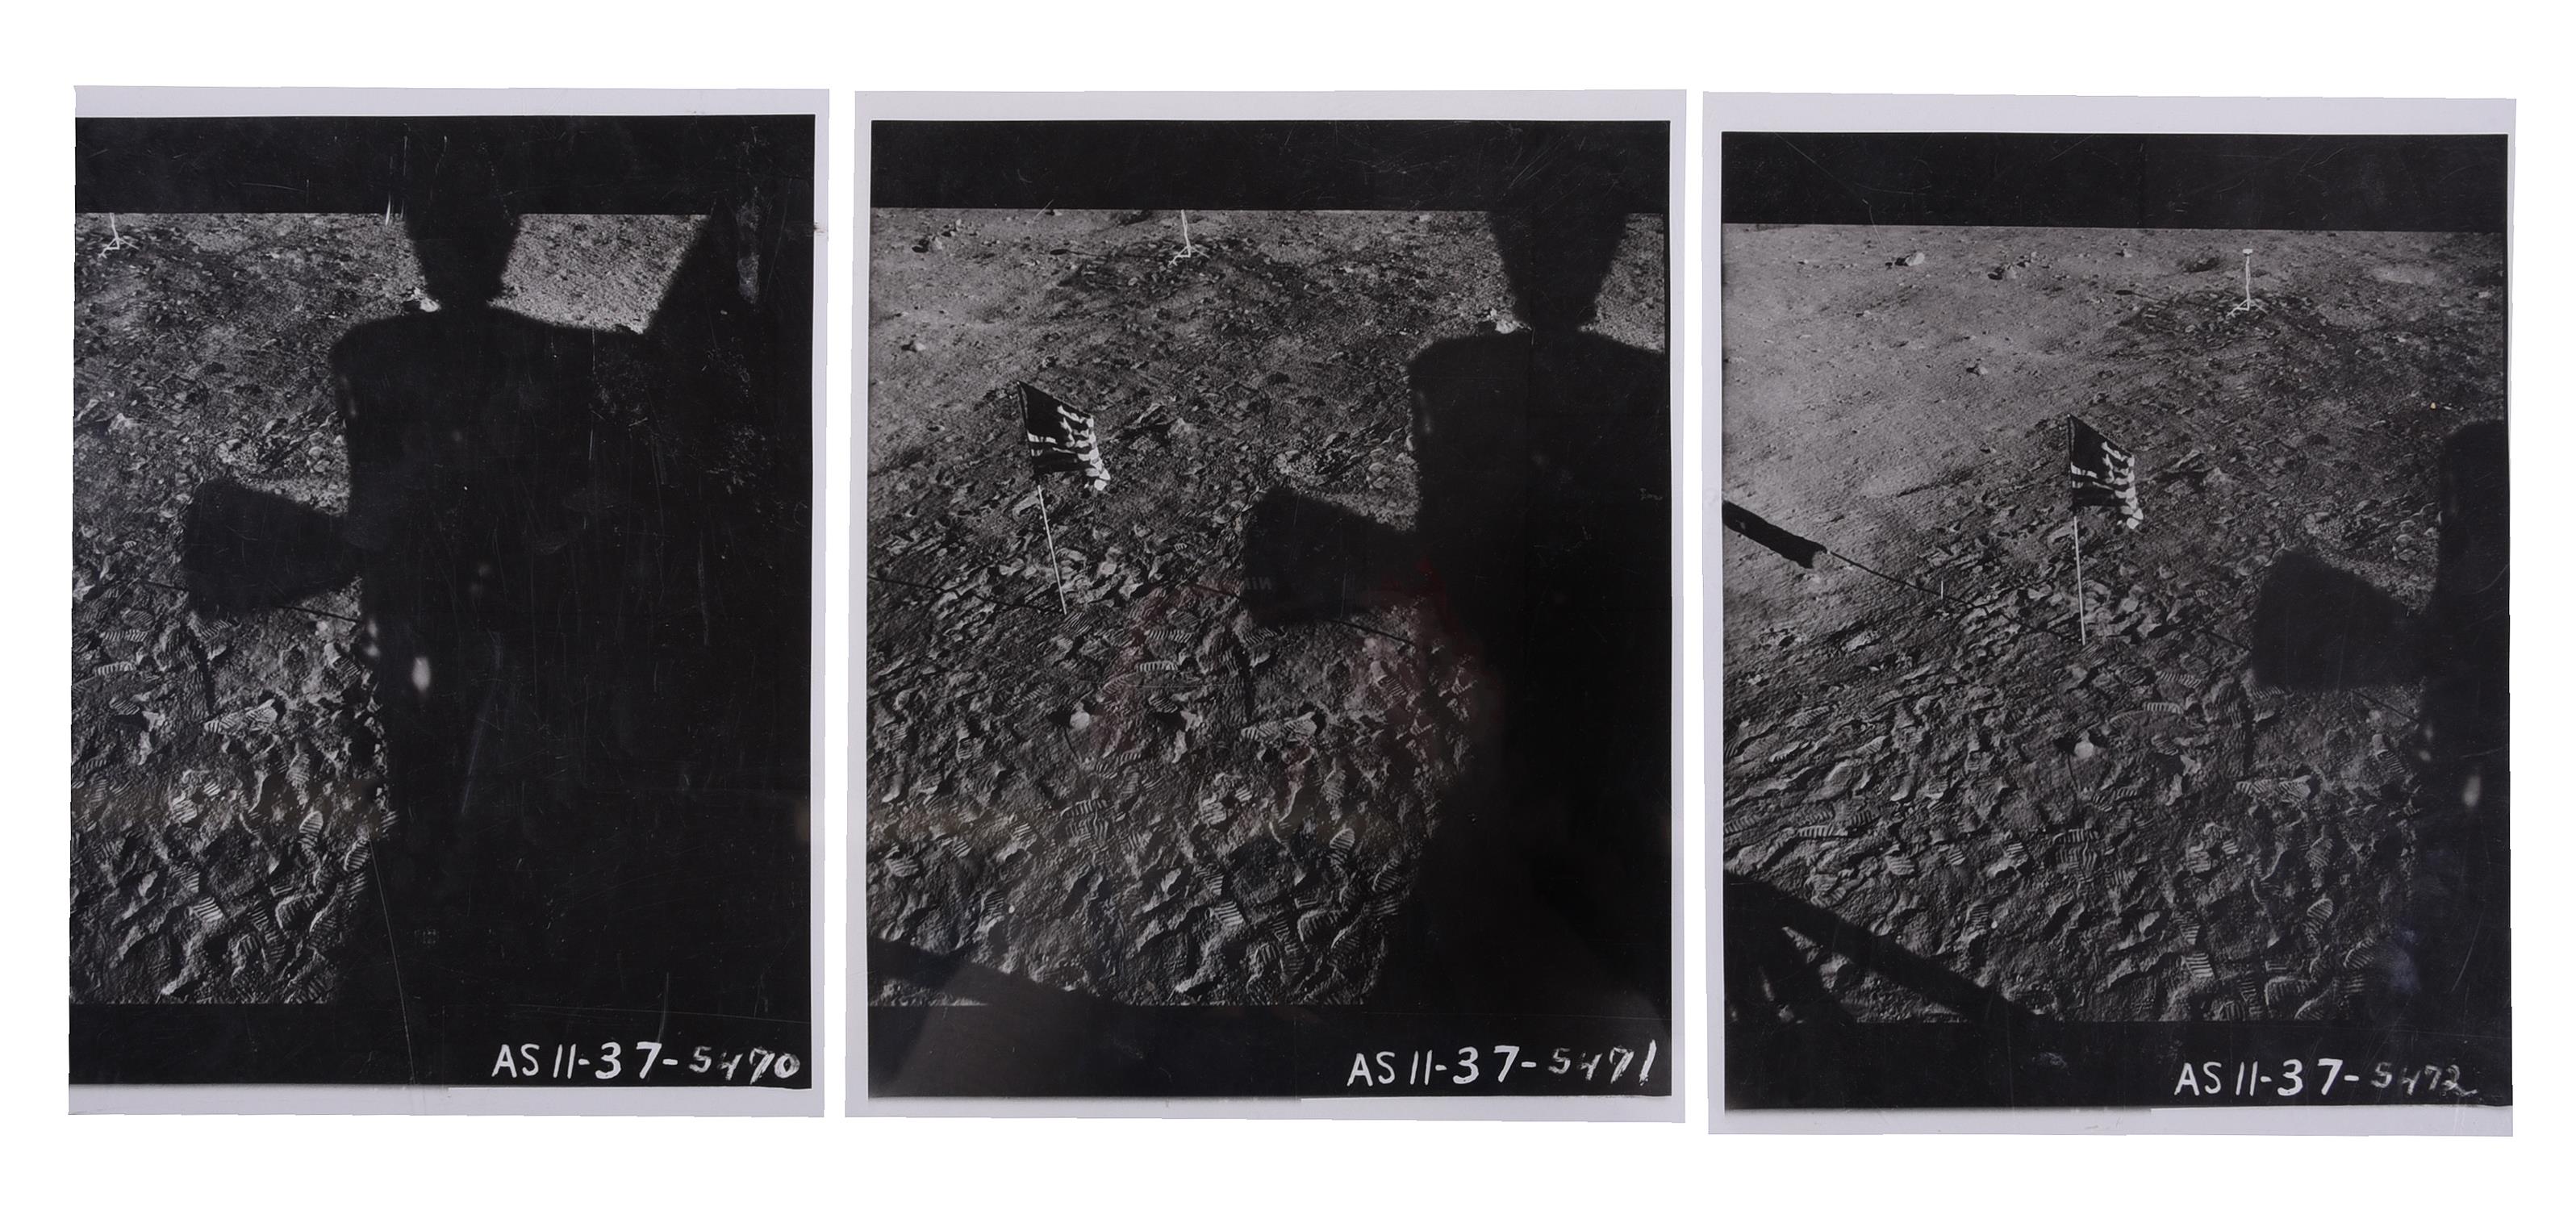 Photographic sequence from the LM showing the US flag surrounded by footprints, Apollo 11, July 1969